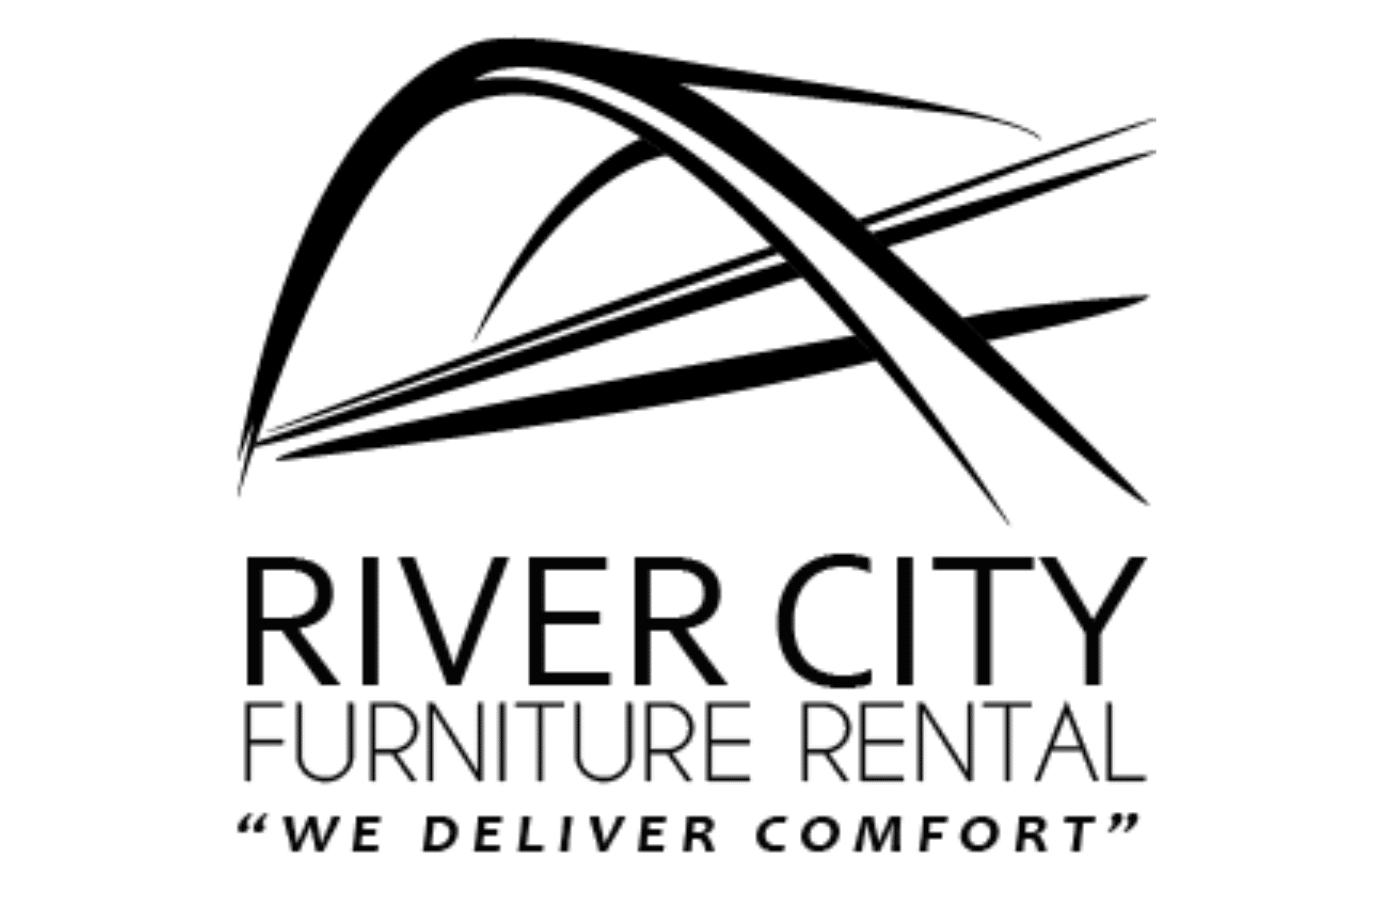 River City Furniture Rental Partners with RC Designs to Improve Corporate Housing